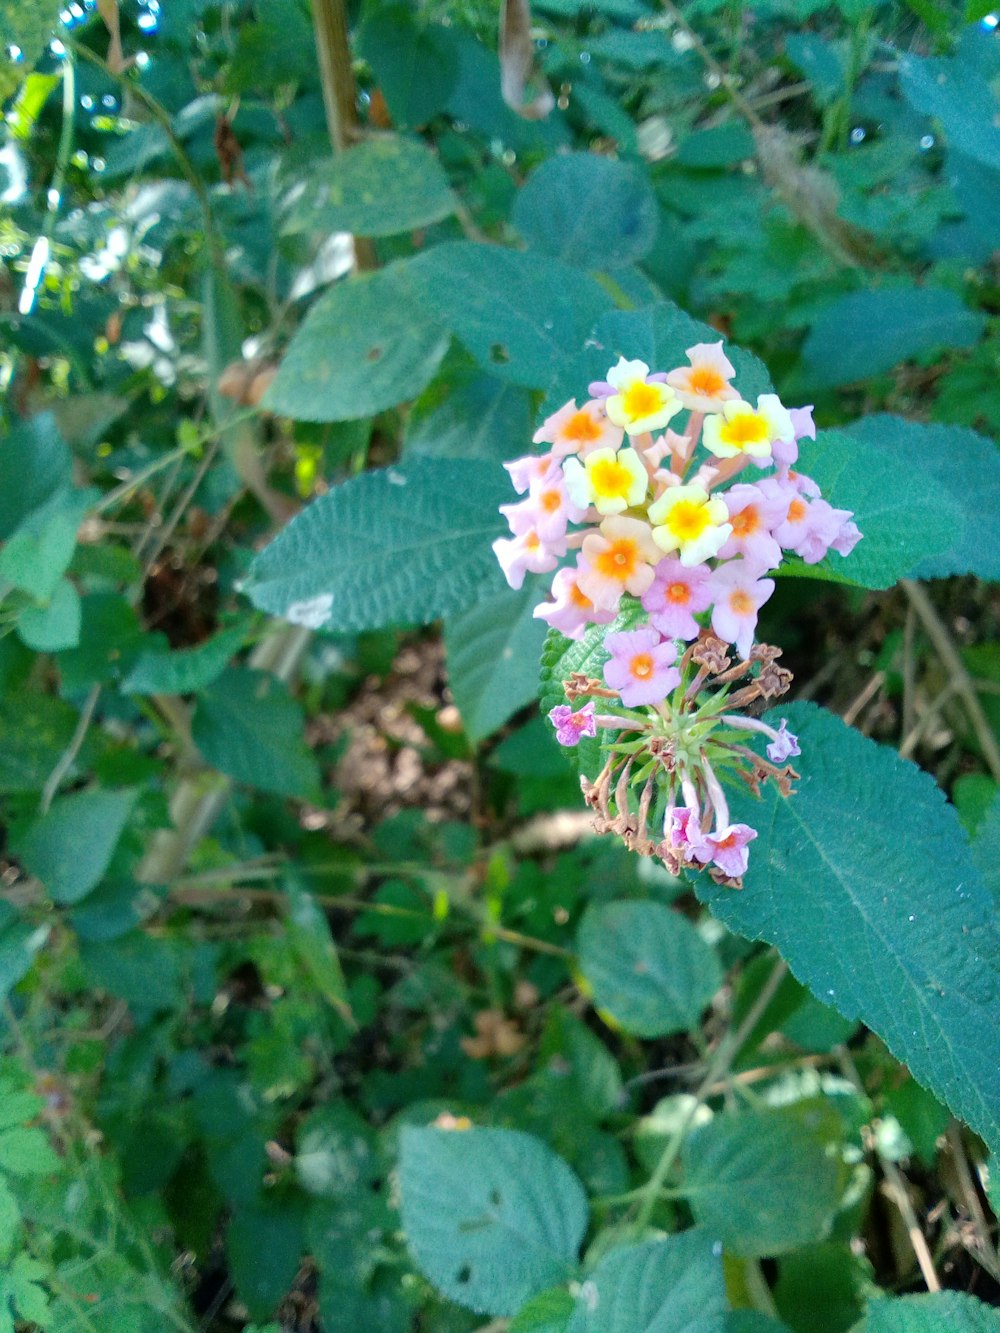 a close-up of some flowers